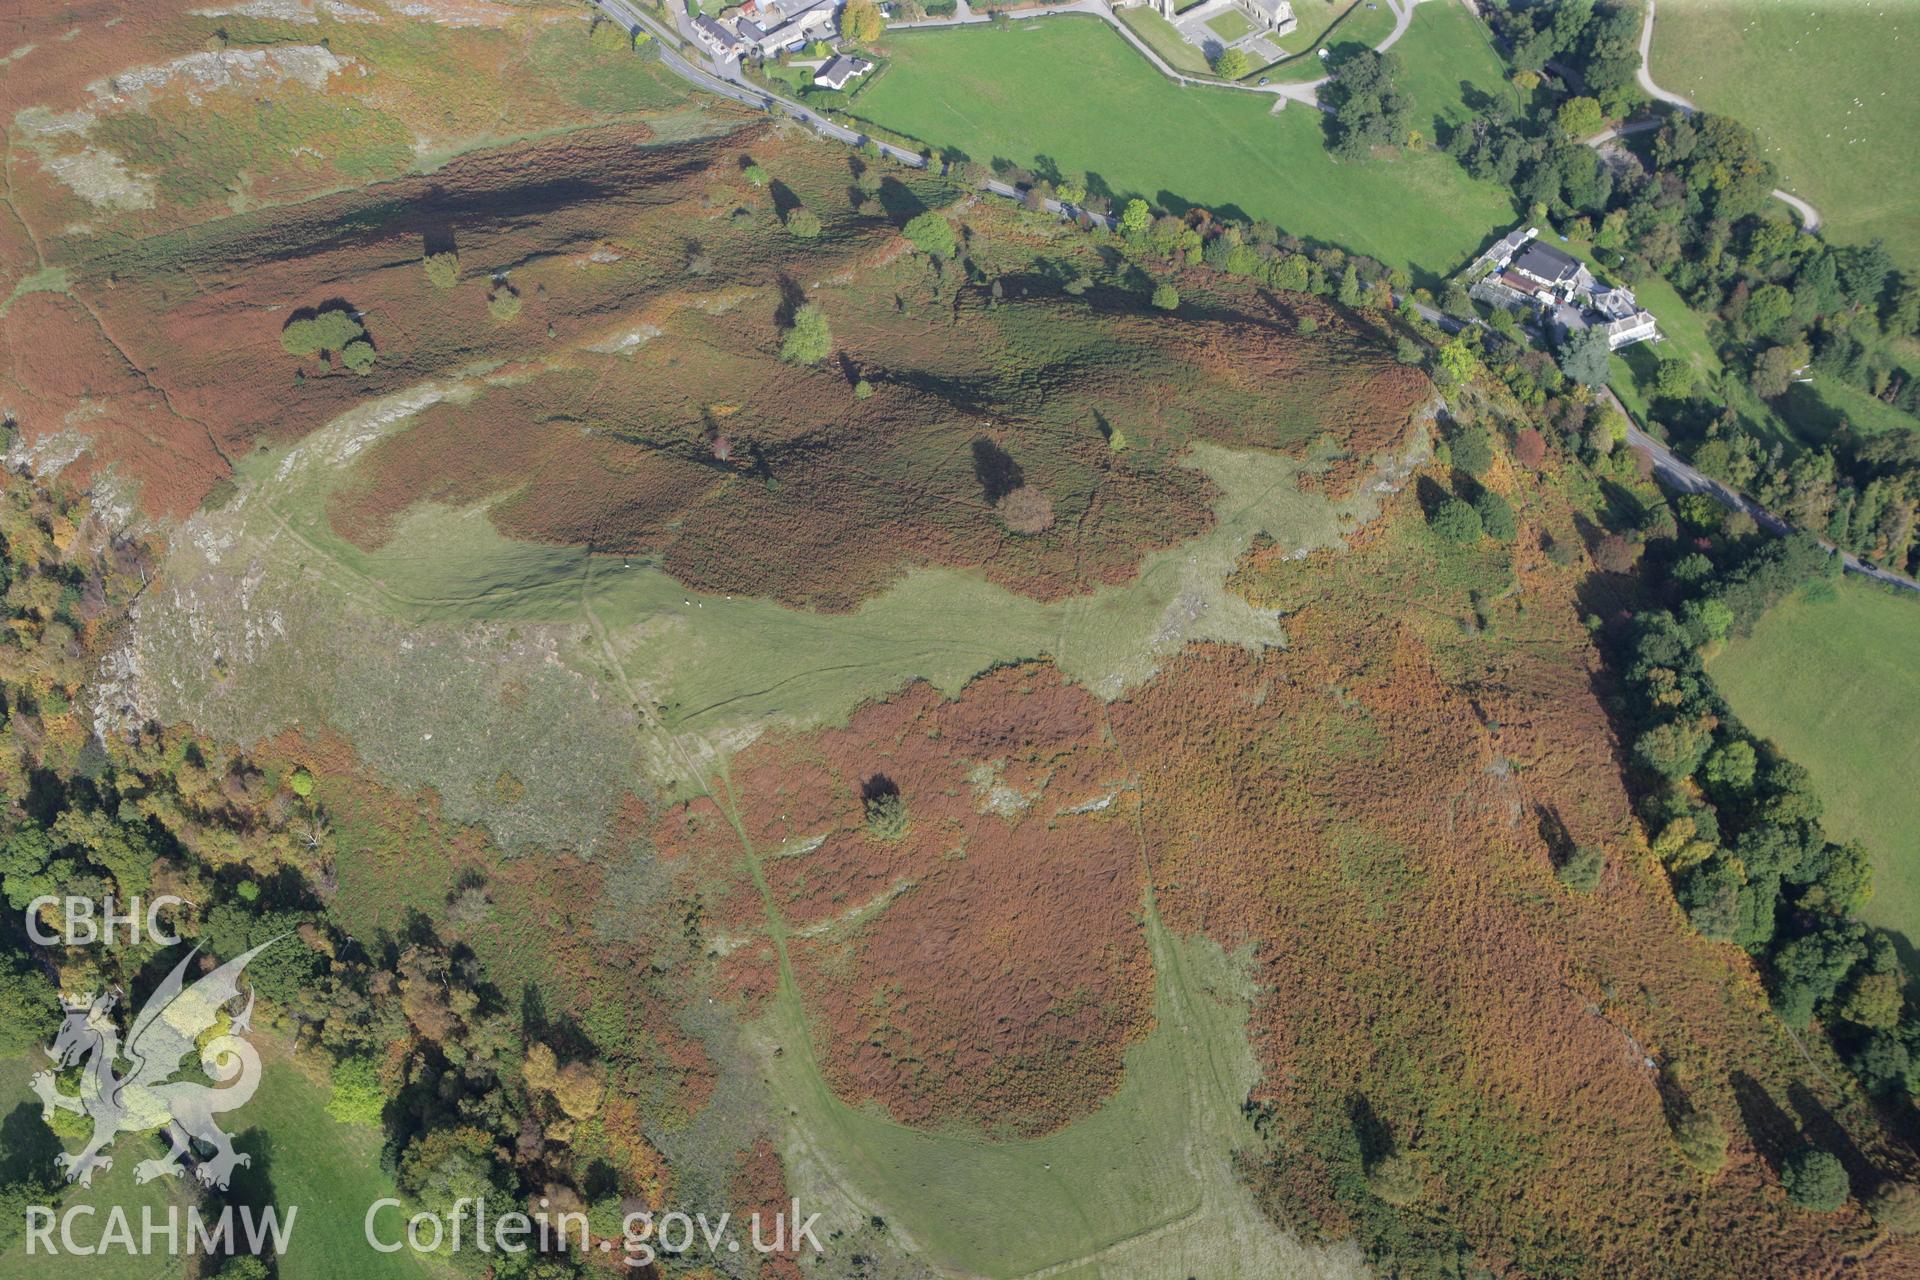 RCAHMW colour oblique aerial photograph of Coed Hyrddyn Field System. Taken on 13 October 2009 by Toby Driver